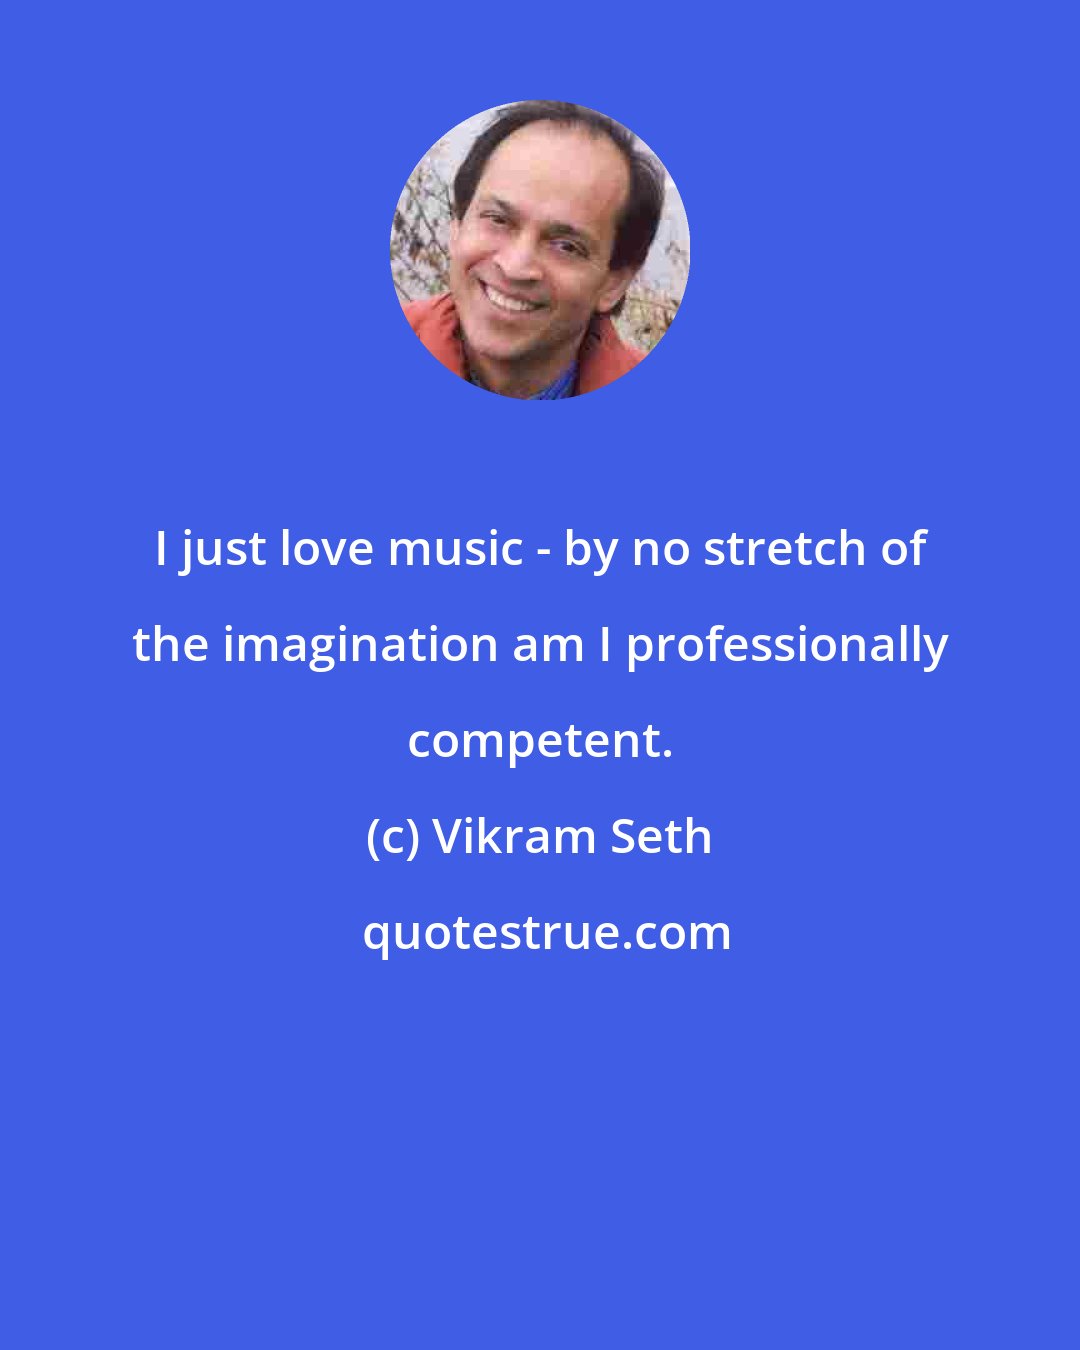 Vikram Seth: I just love music - by no stretch of the imagination am I professionally competent.